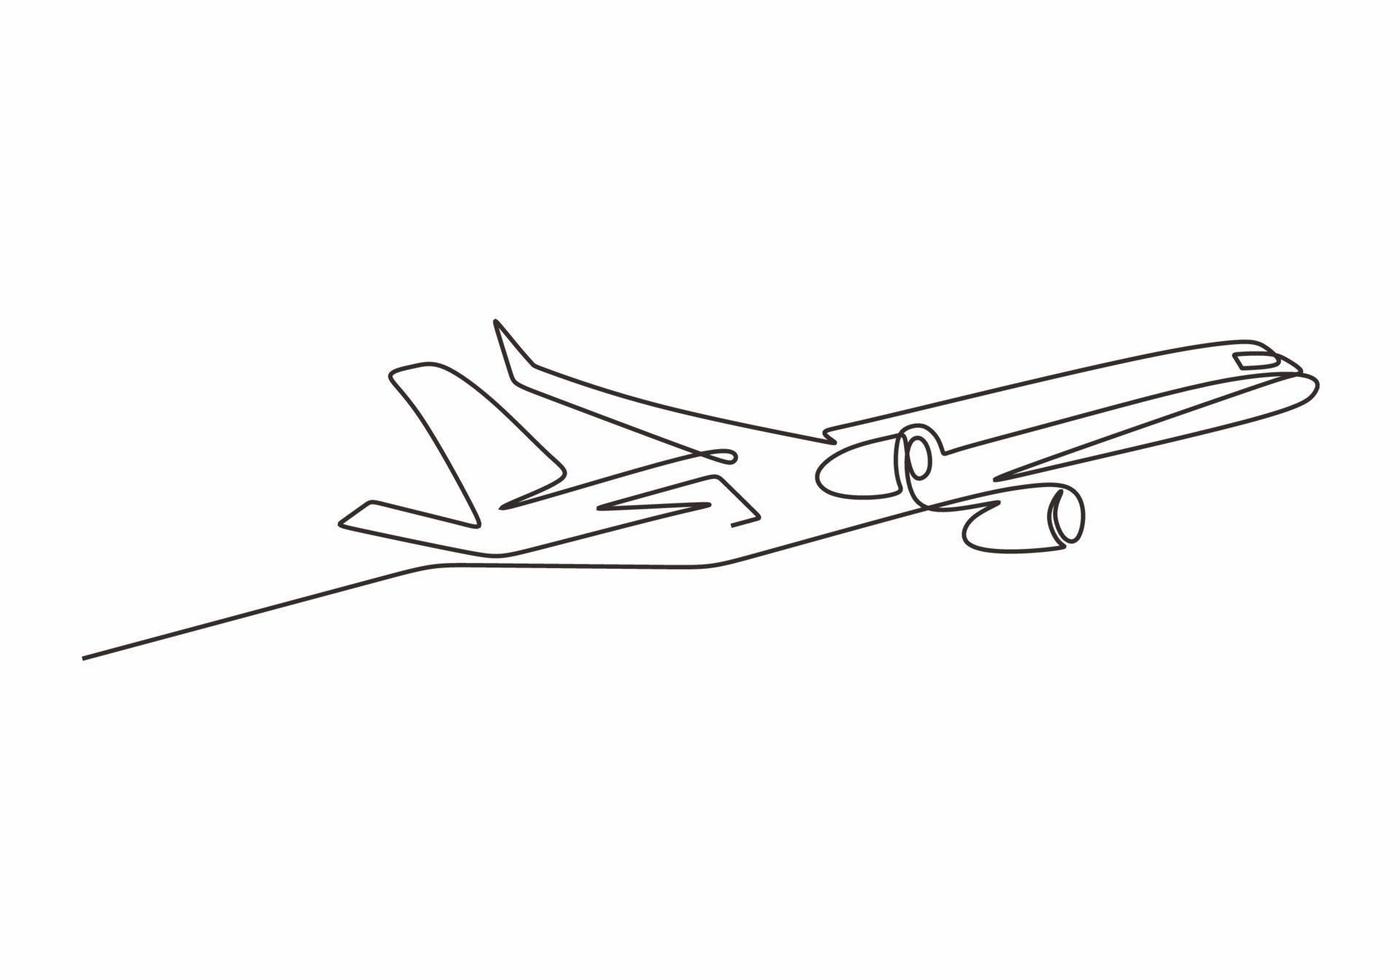 Airplane one line drawing minimal design. vector